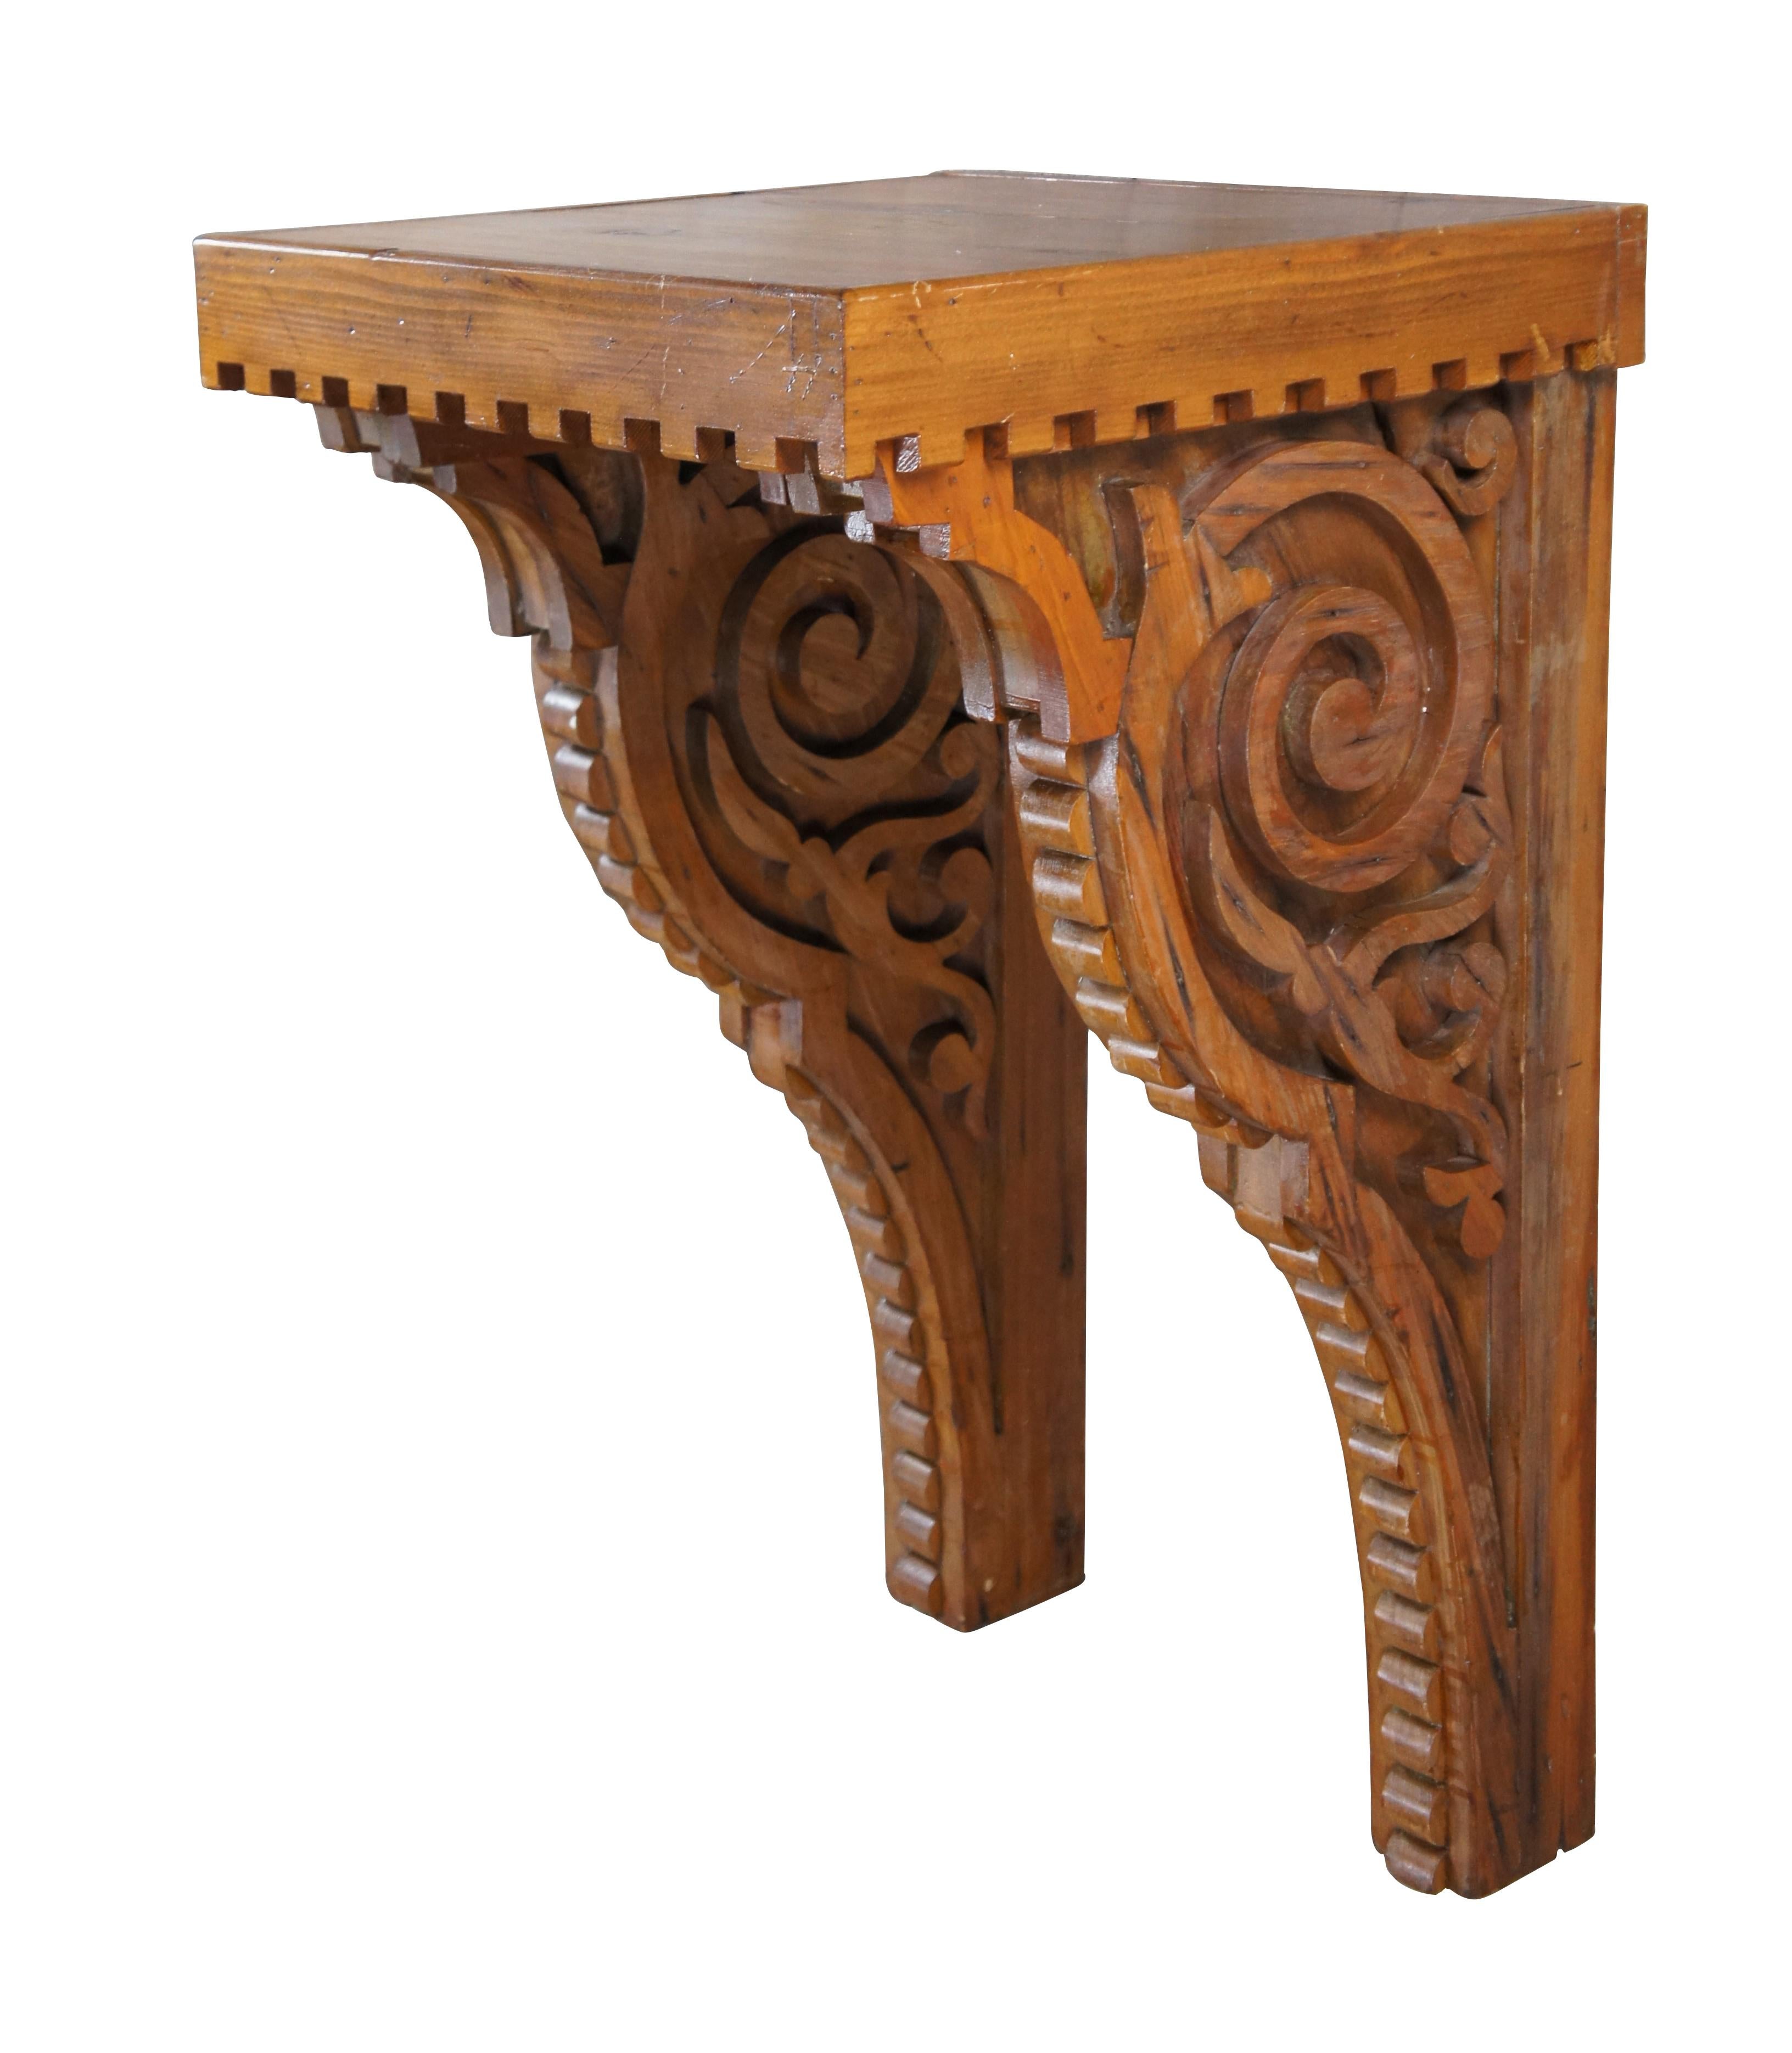 A large and impressive antique reclaimed altar wall shelf / sconce / corbel / or bracket.  Made of pine featuring ornate sawtooth and scrolled design 

Dimensions:
37.5